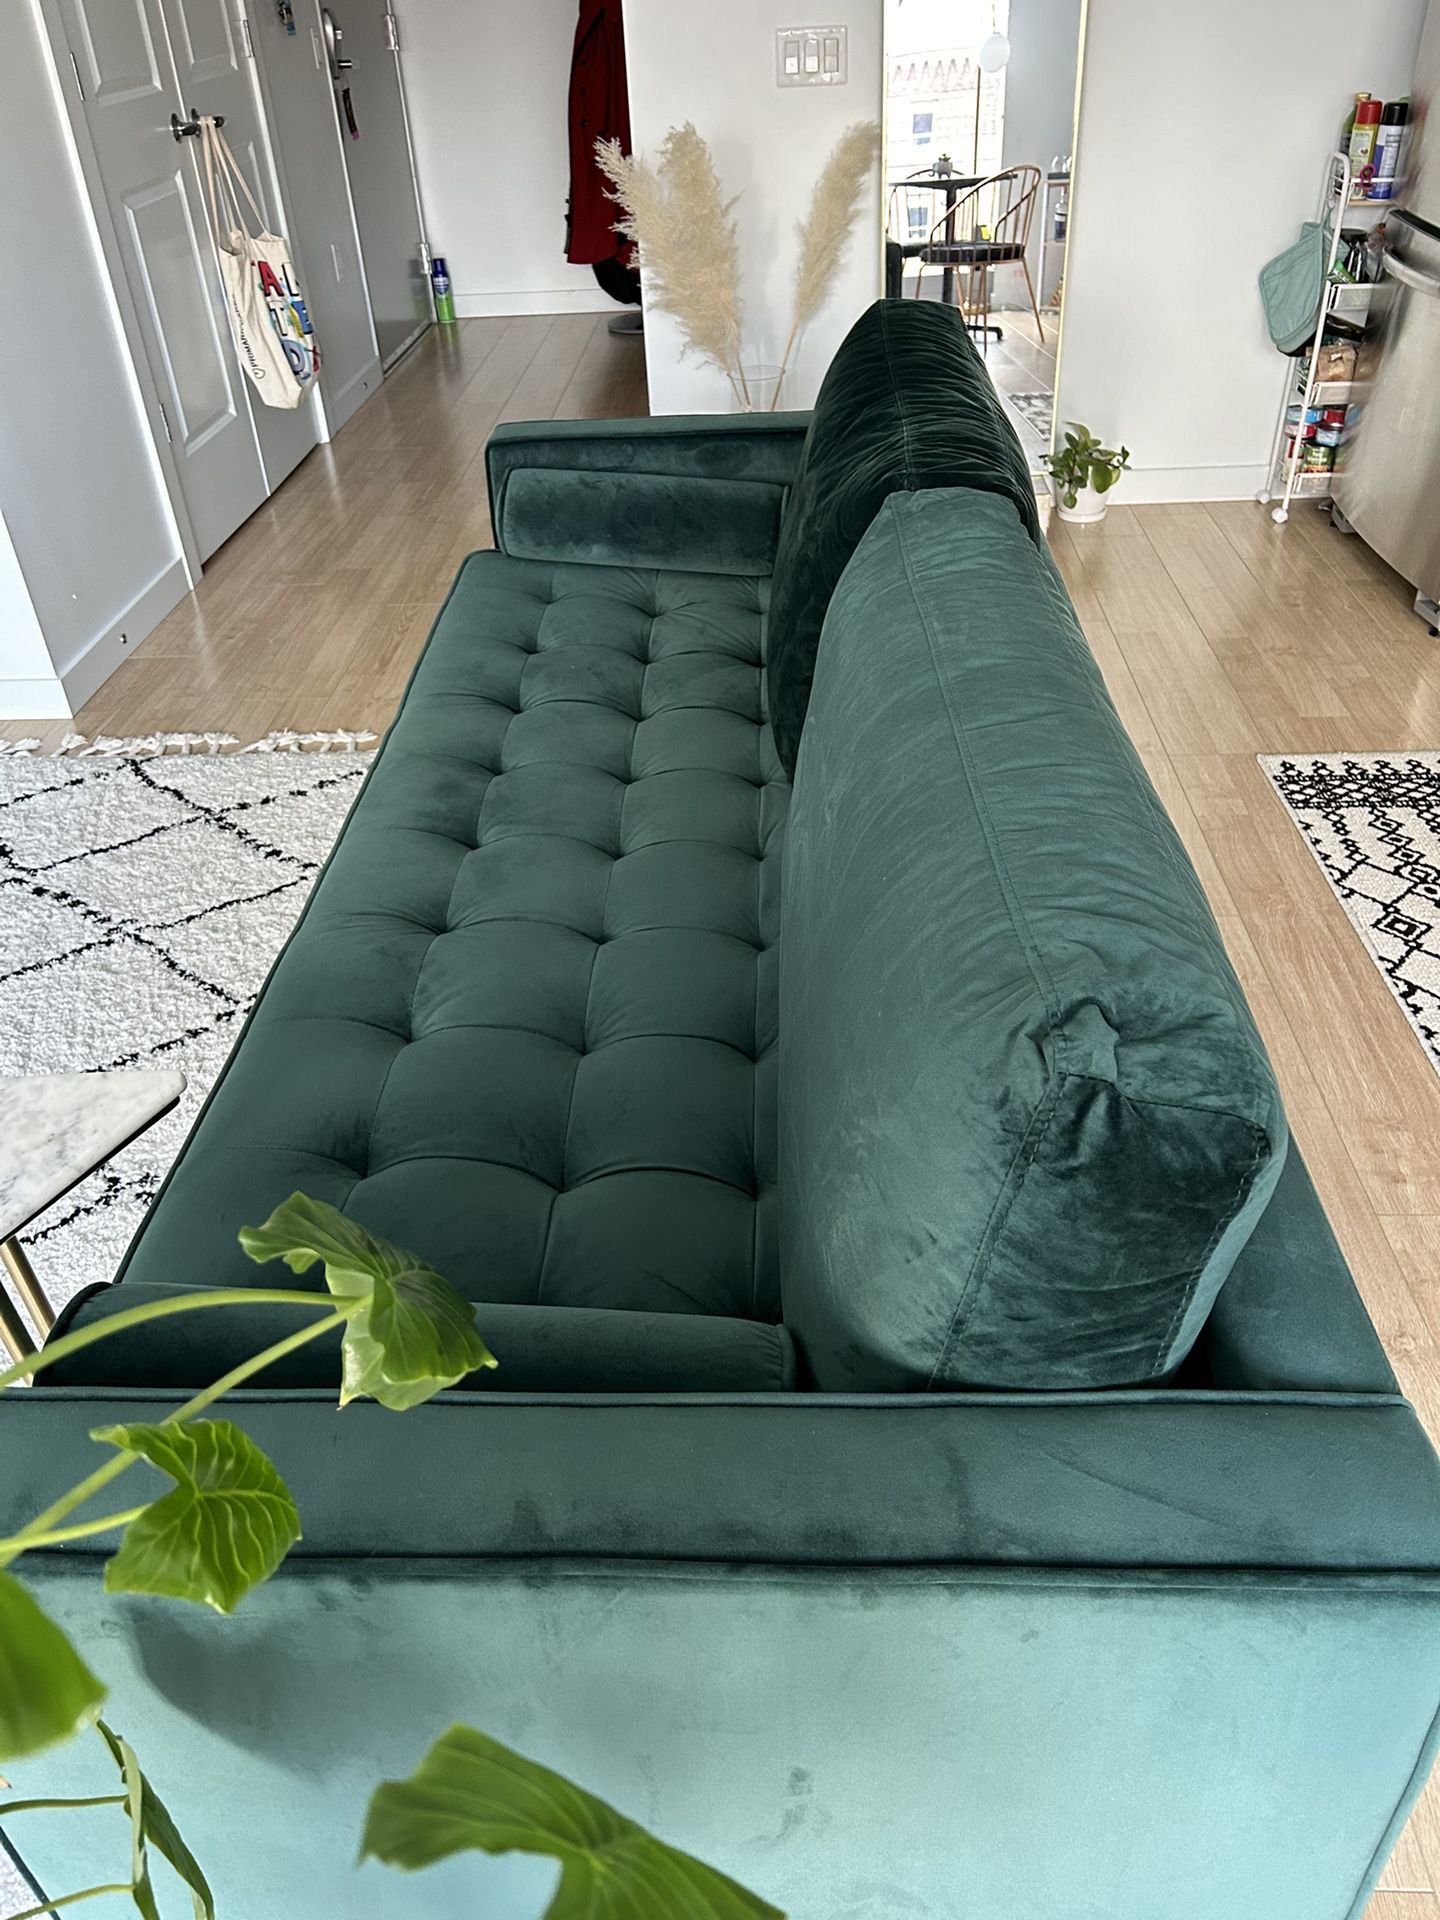 Joybird Emerald Green Couch Dupe 